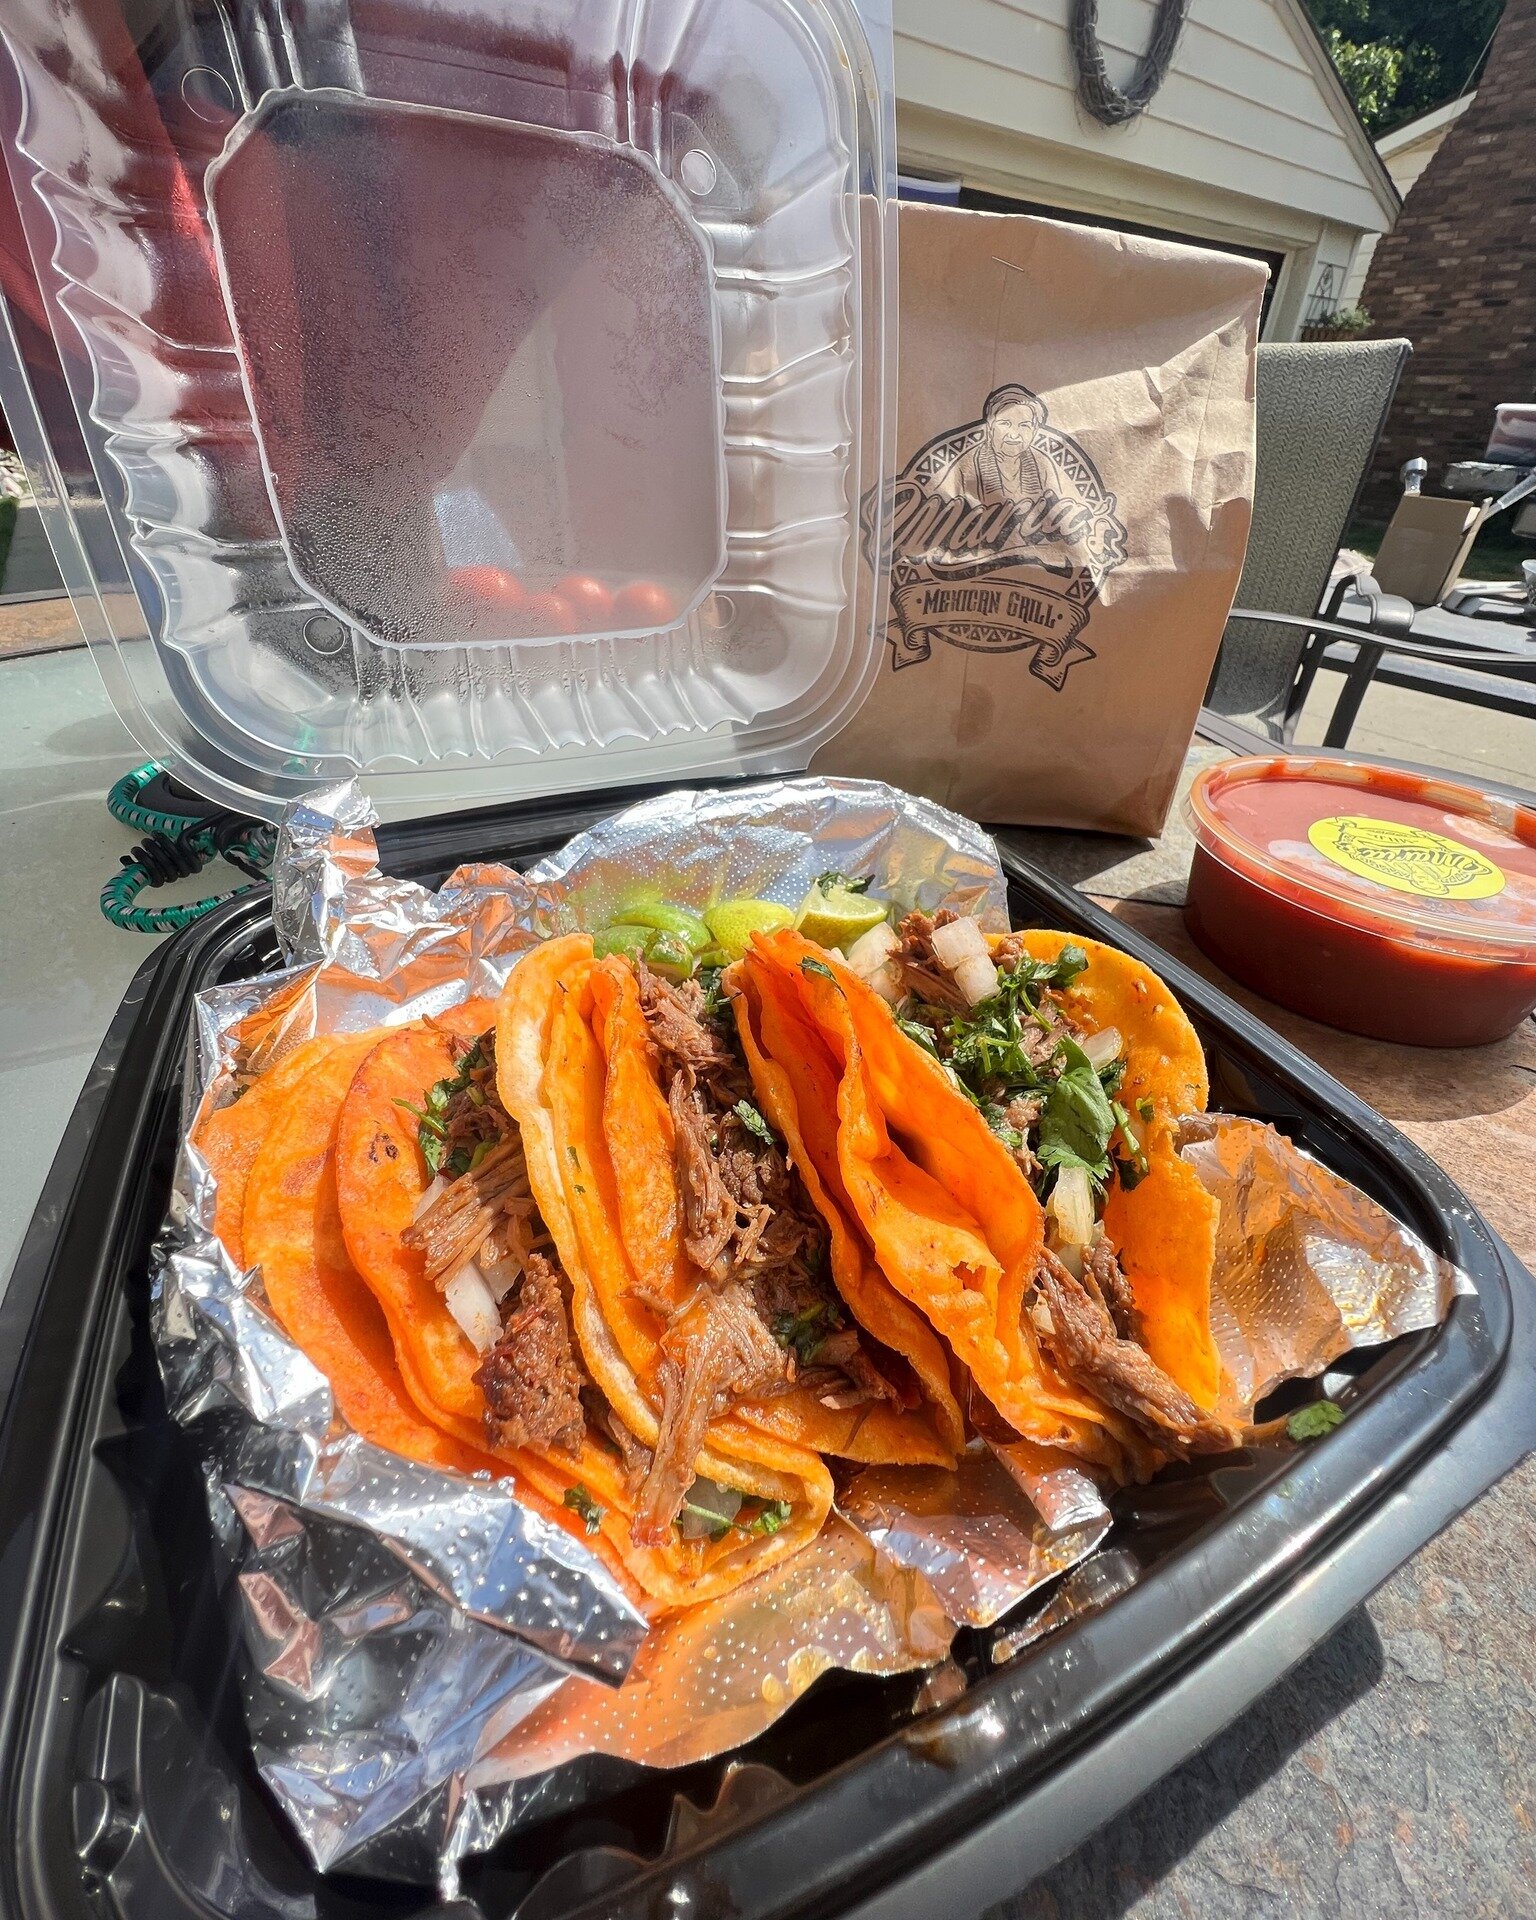 TGI(B)F 😜🌮

Thank god it&rsquo;s BIRRIA FRIDAY! A taco so special, we gave it its own day. 😏

Call to place your order. Or order online and get it delivered!

📱 (734) 307-7248
💻 mariasmexicangrillmi.com
&bull;
&bull;
&bull;
#mexicanfood #mexican